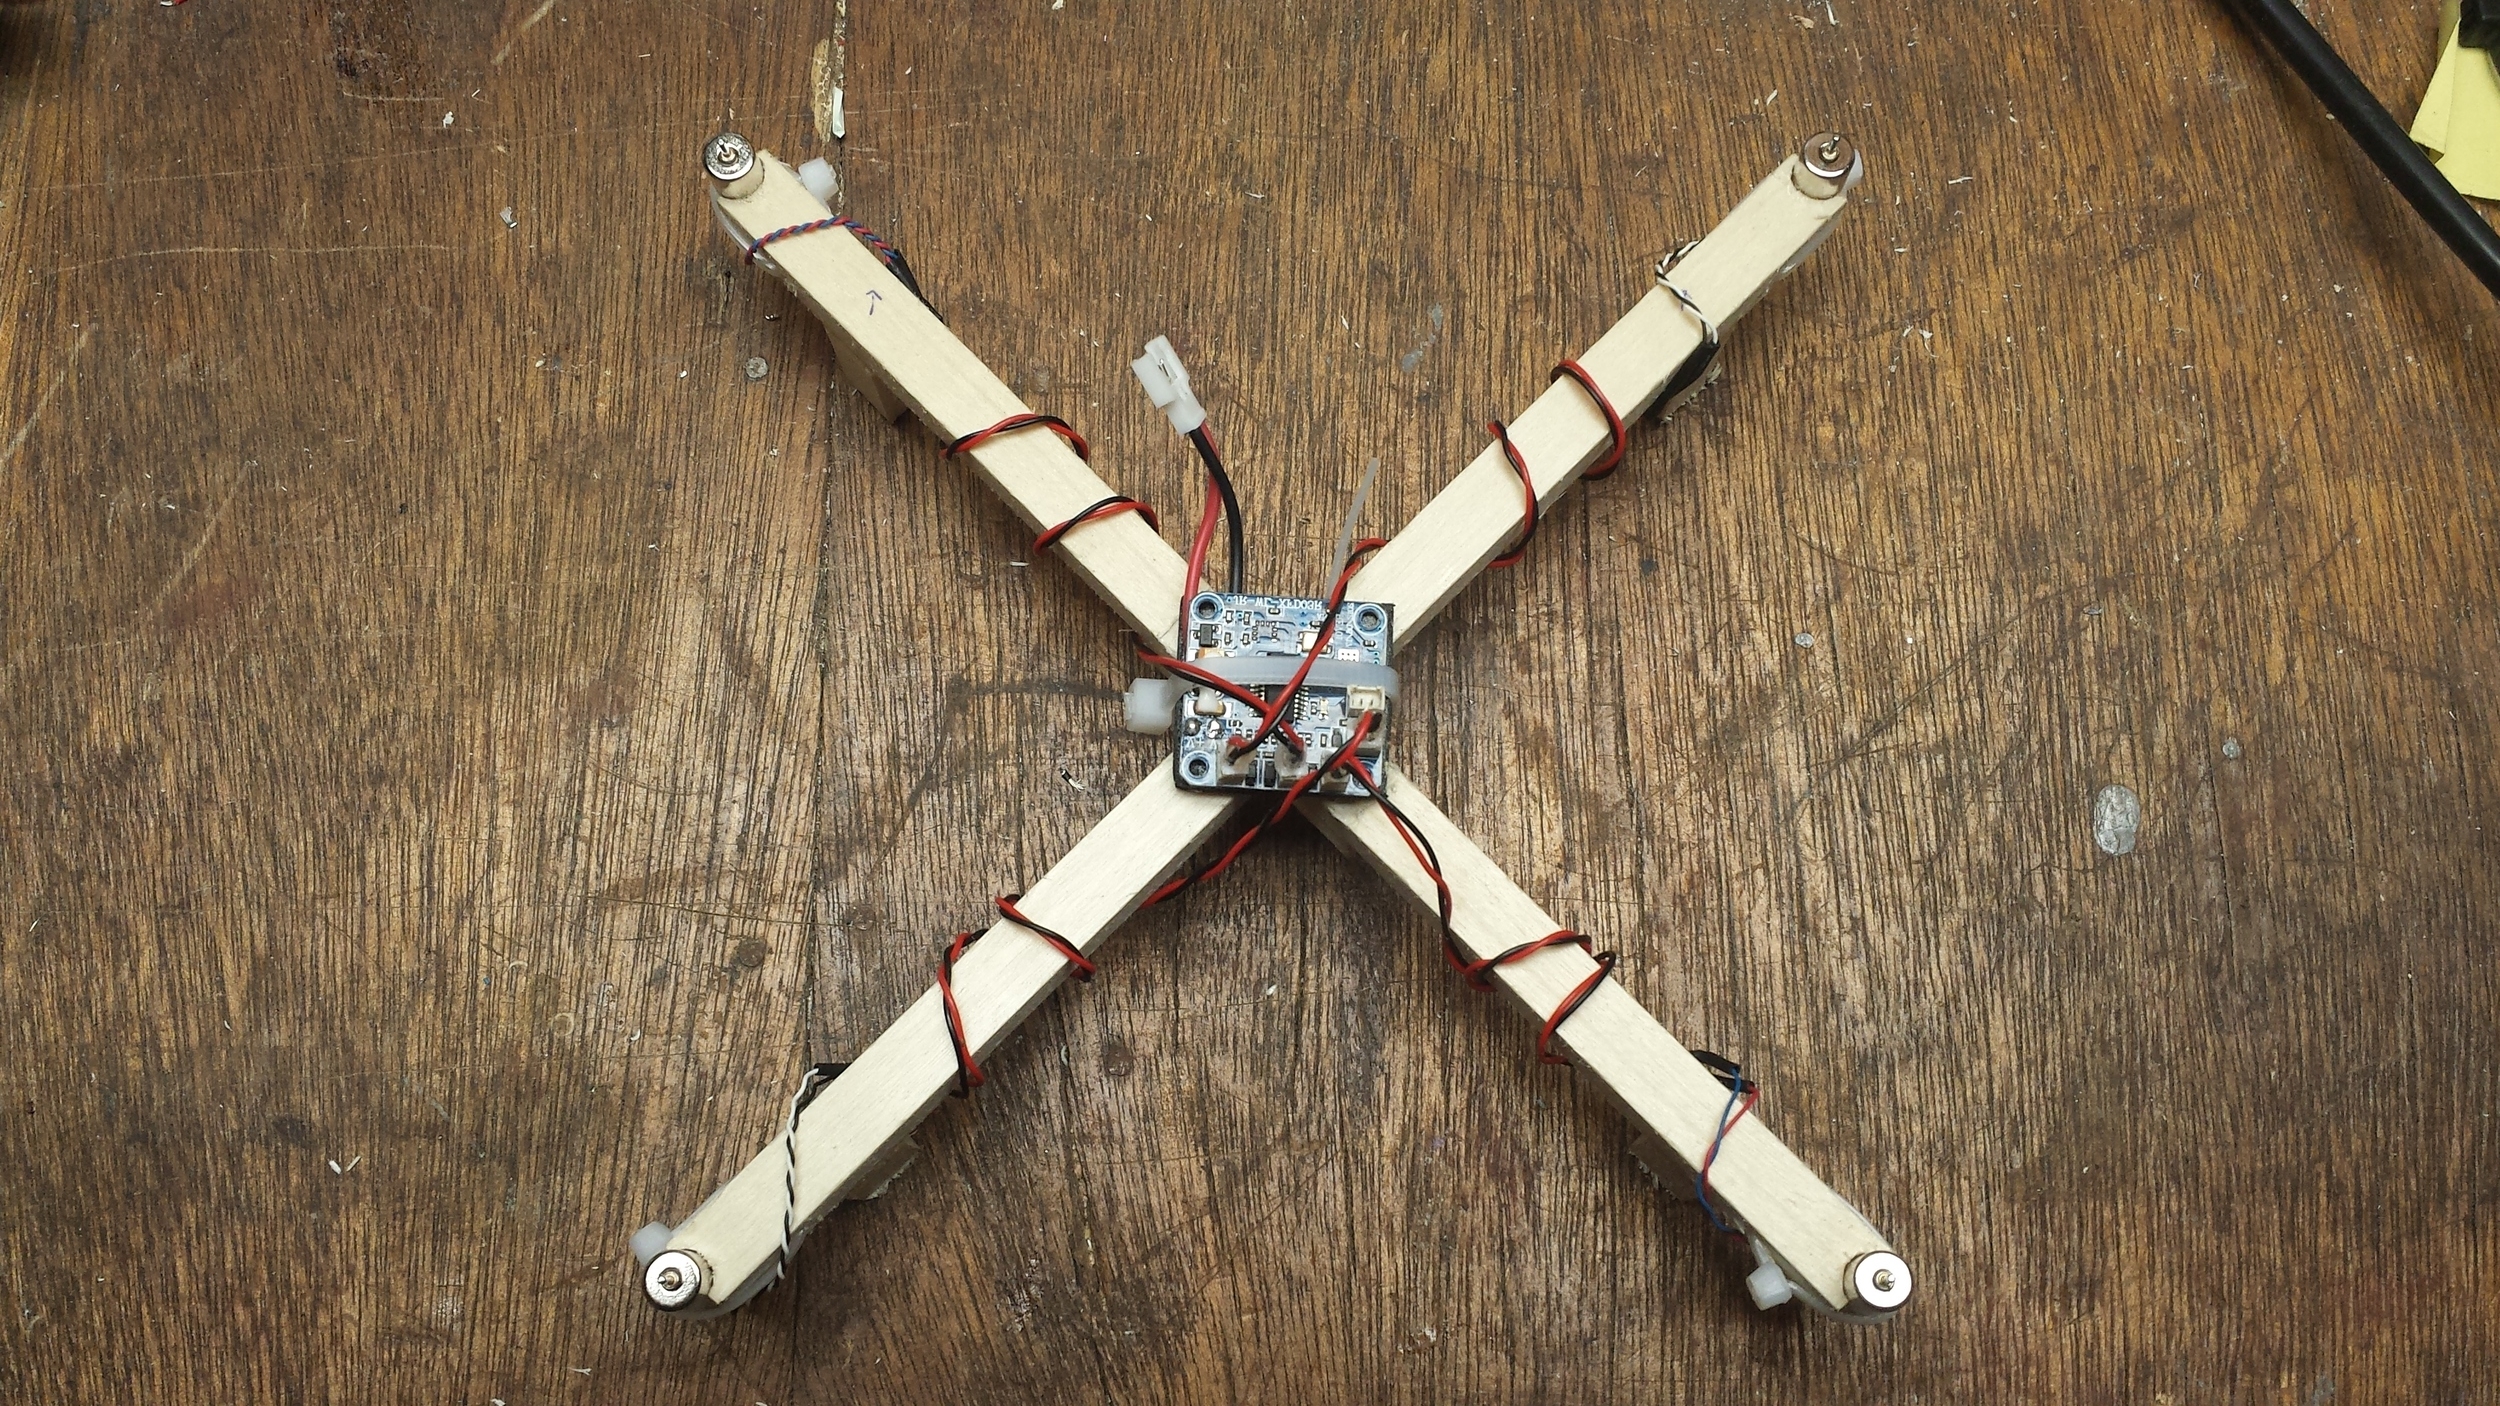 Wires Wrapped and Connected to Flight Controller